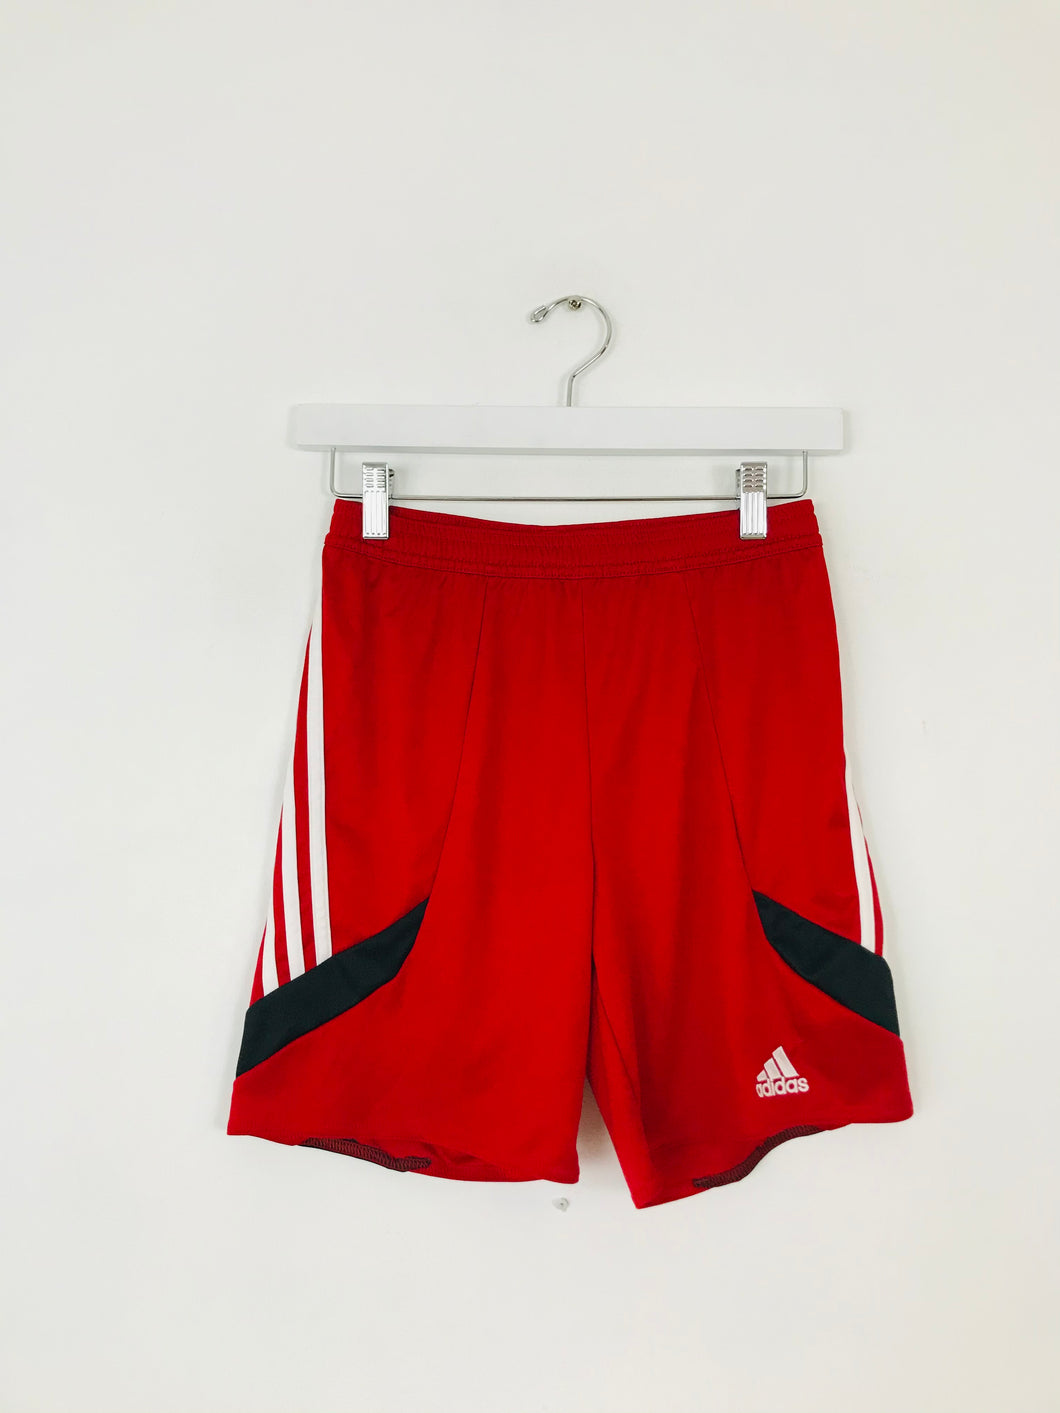 Adidas Kid’s Climalite Sports Bottoms Shorts | Youth Large | Red